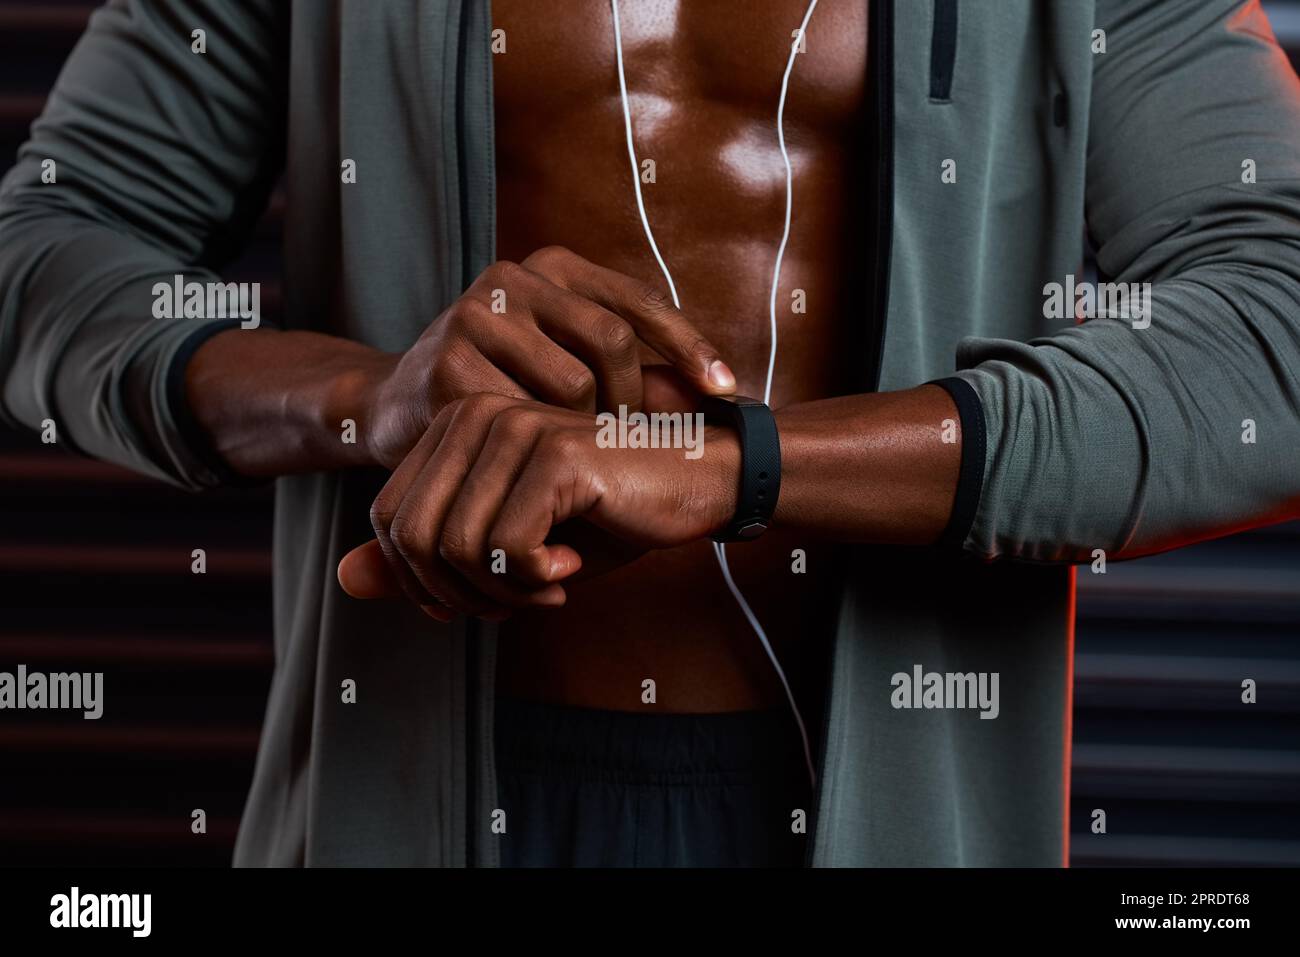 Its the perfect time to hit those monster reps. Studio shot of an unrecognizable male athlete looking at his wrist watch against a grey background. Stock Photo